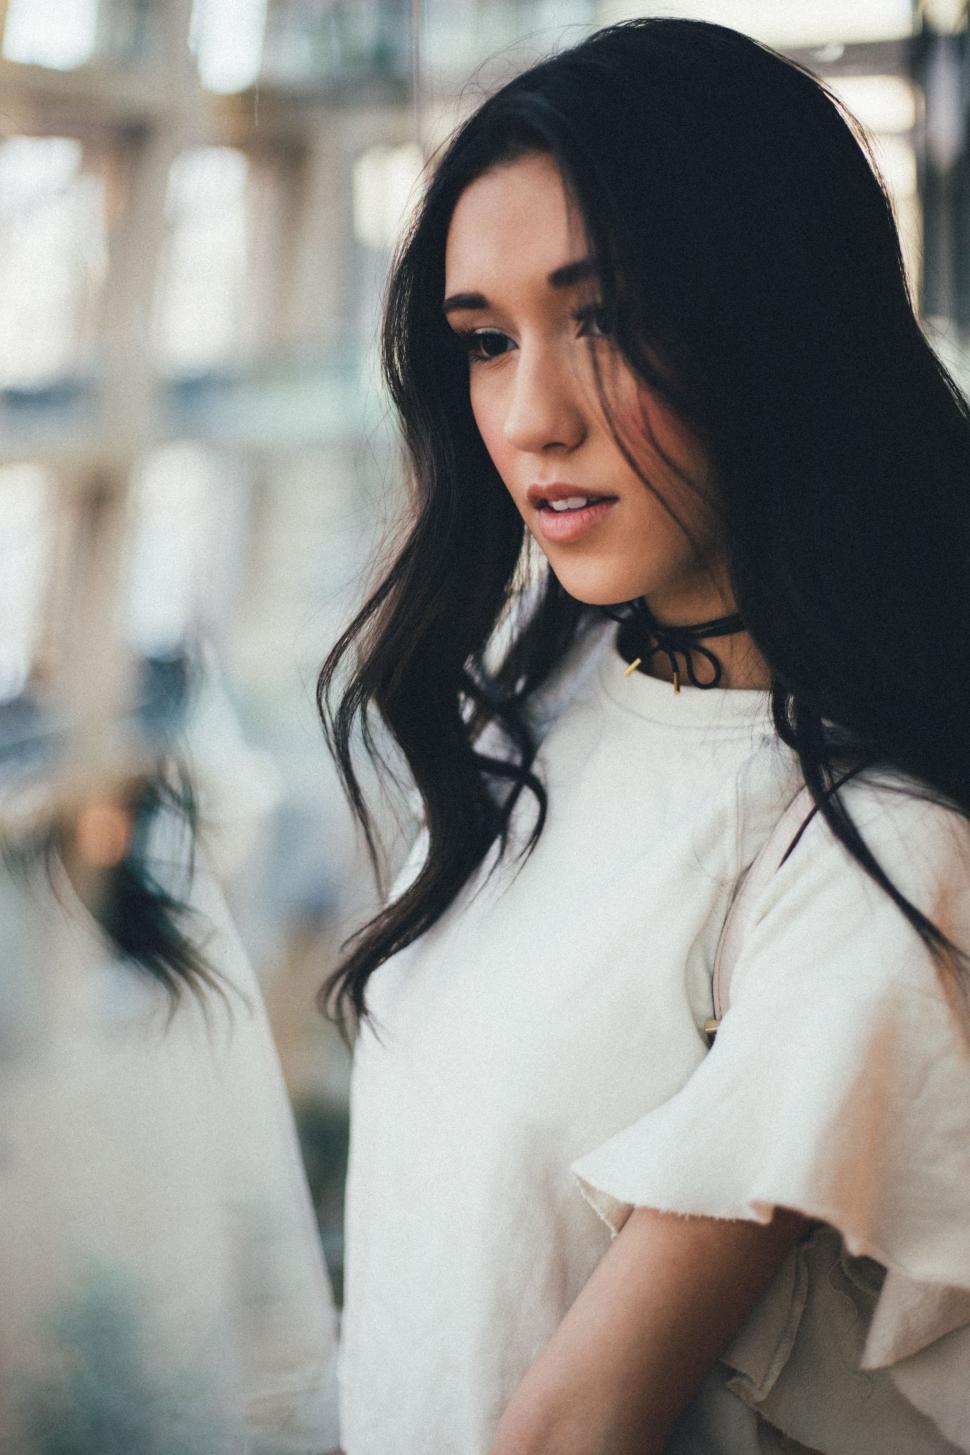 Free Image of Woman With Long Black Hair Wearing White Top 